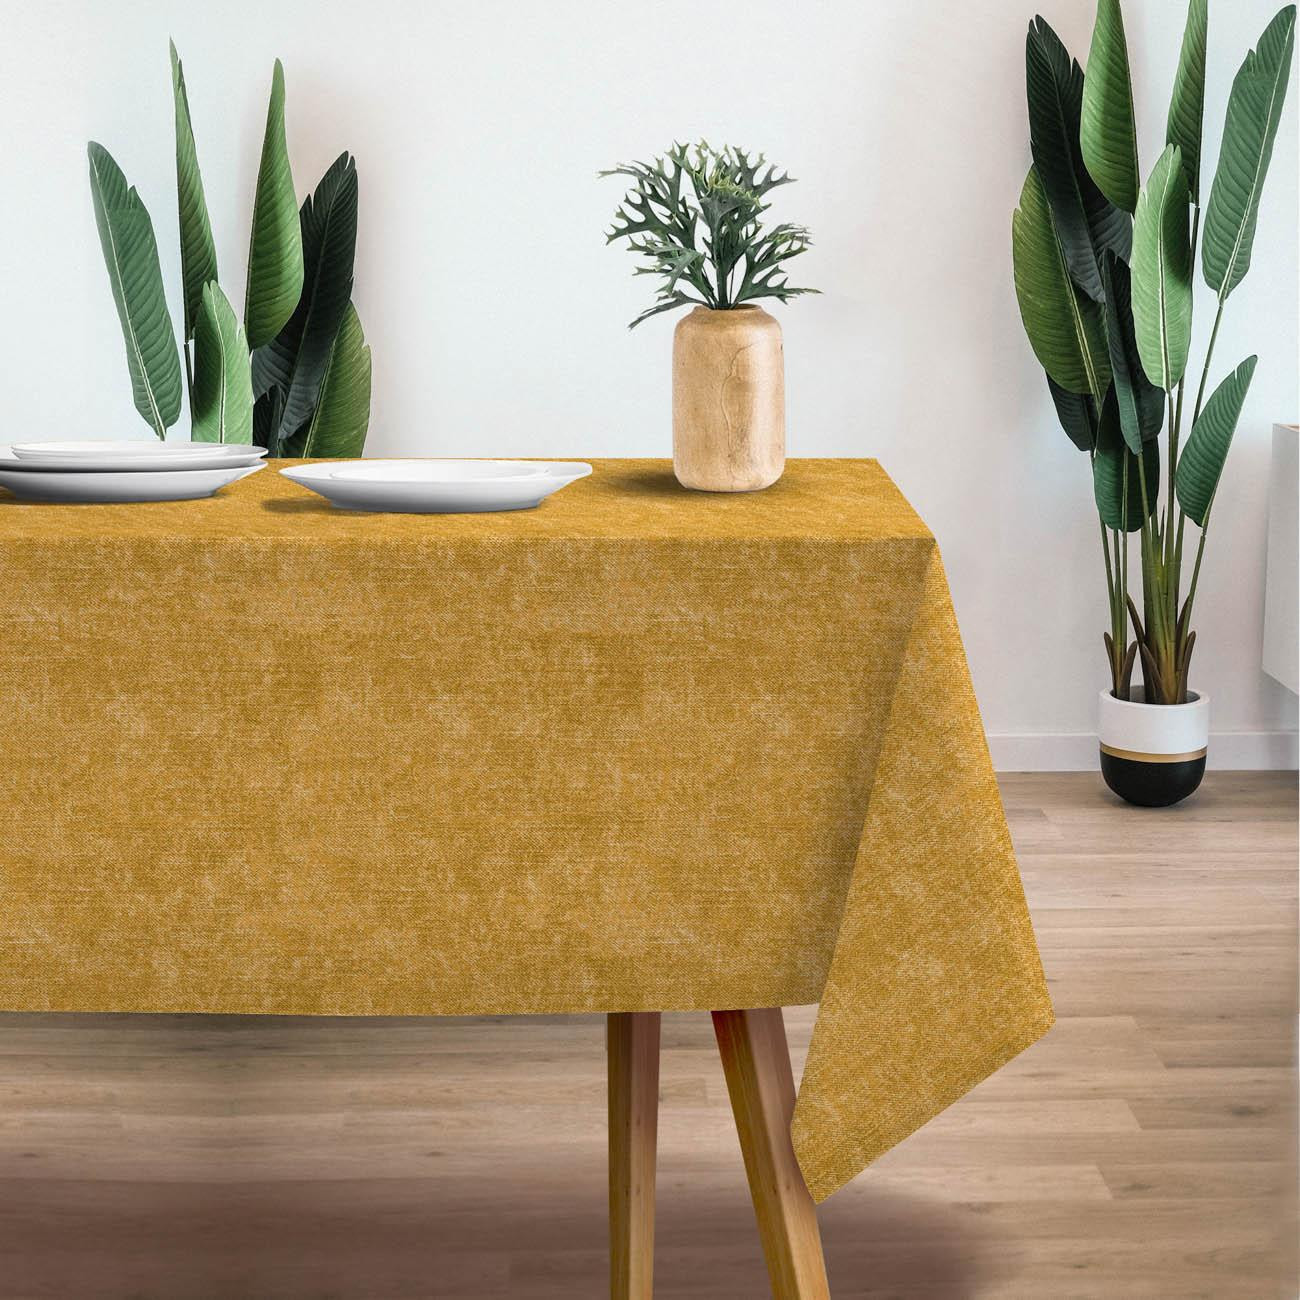 ACID WASH / MUSTARD  - Woven Fabric for tablecloths